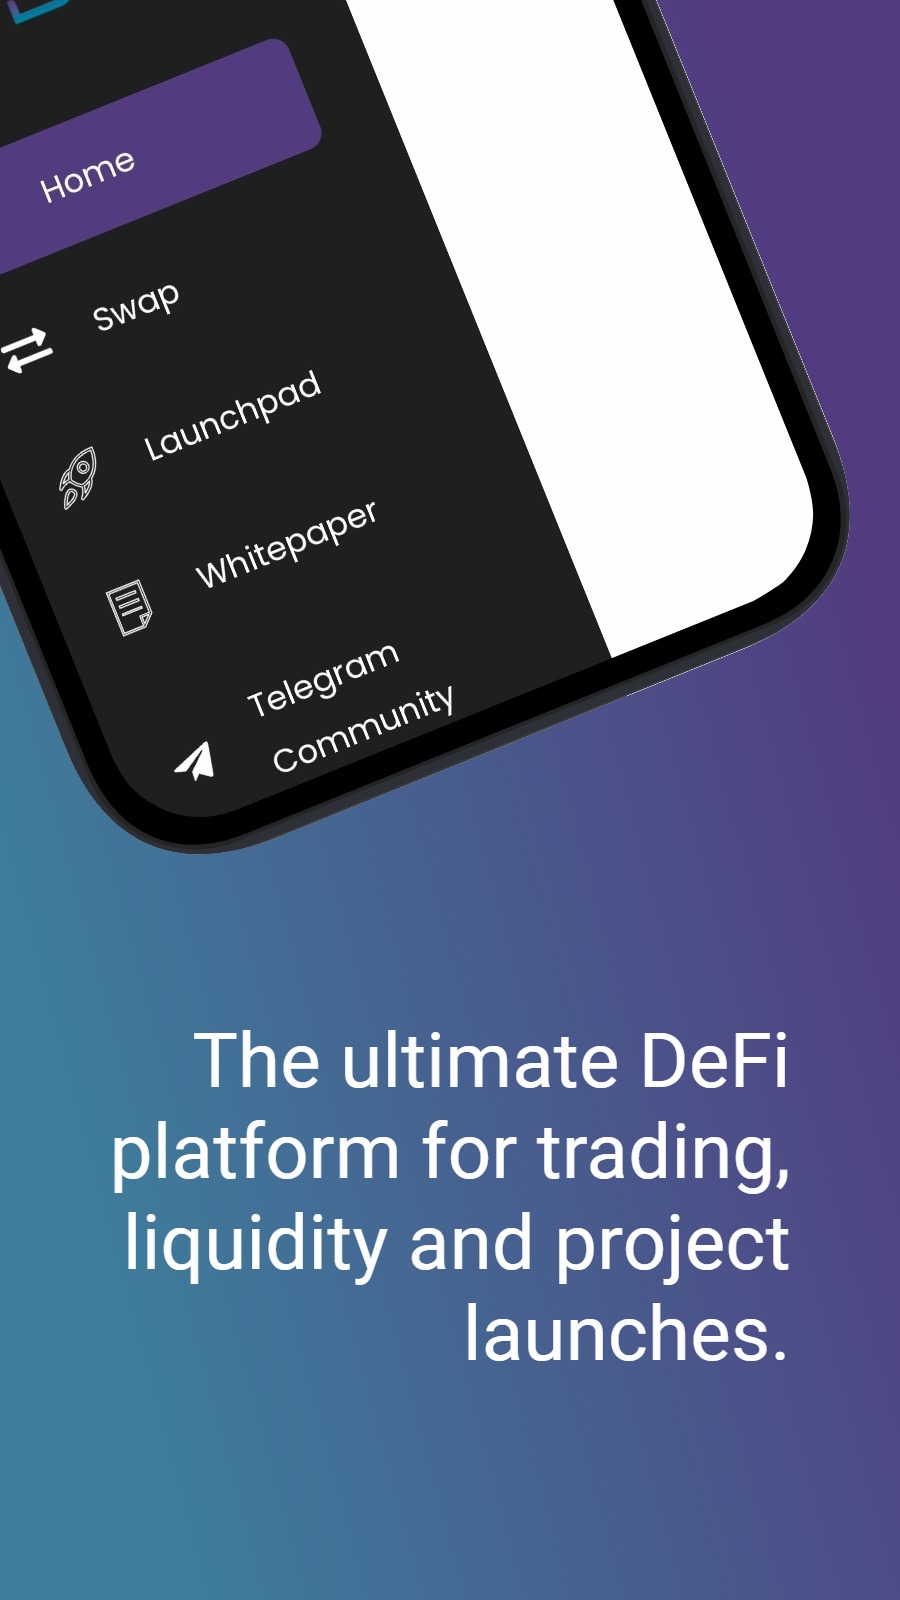 The ultimate DeFi platform for trading, liquidity and project launches.